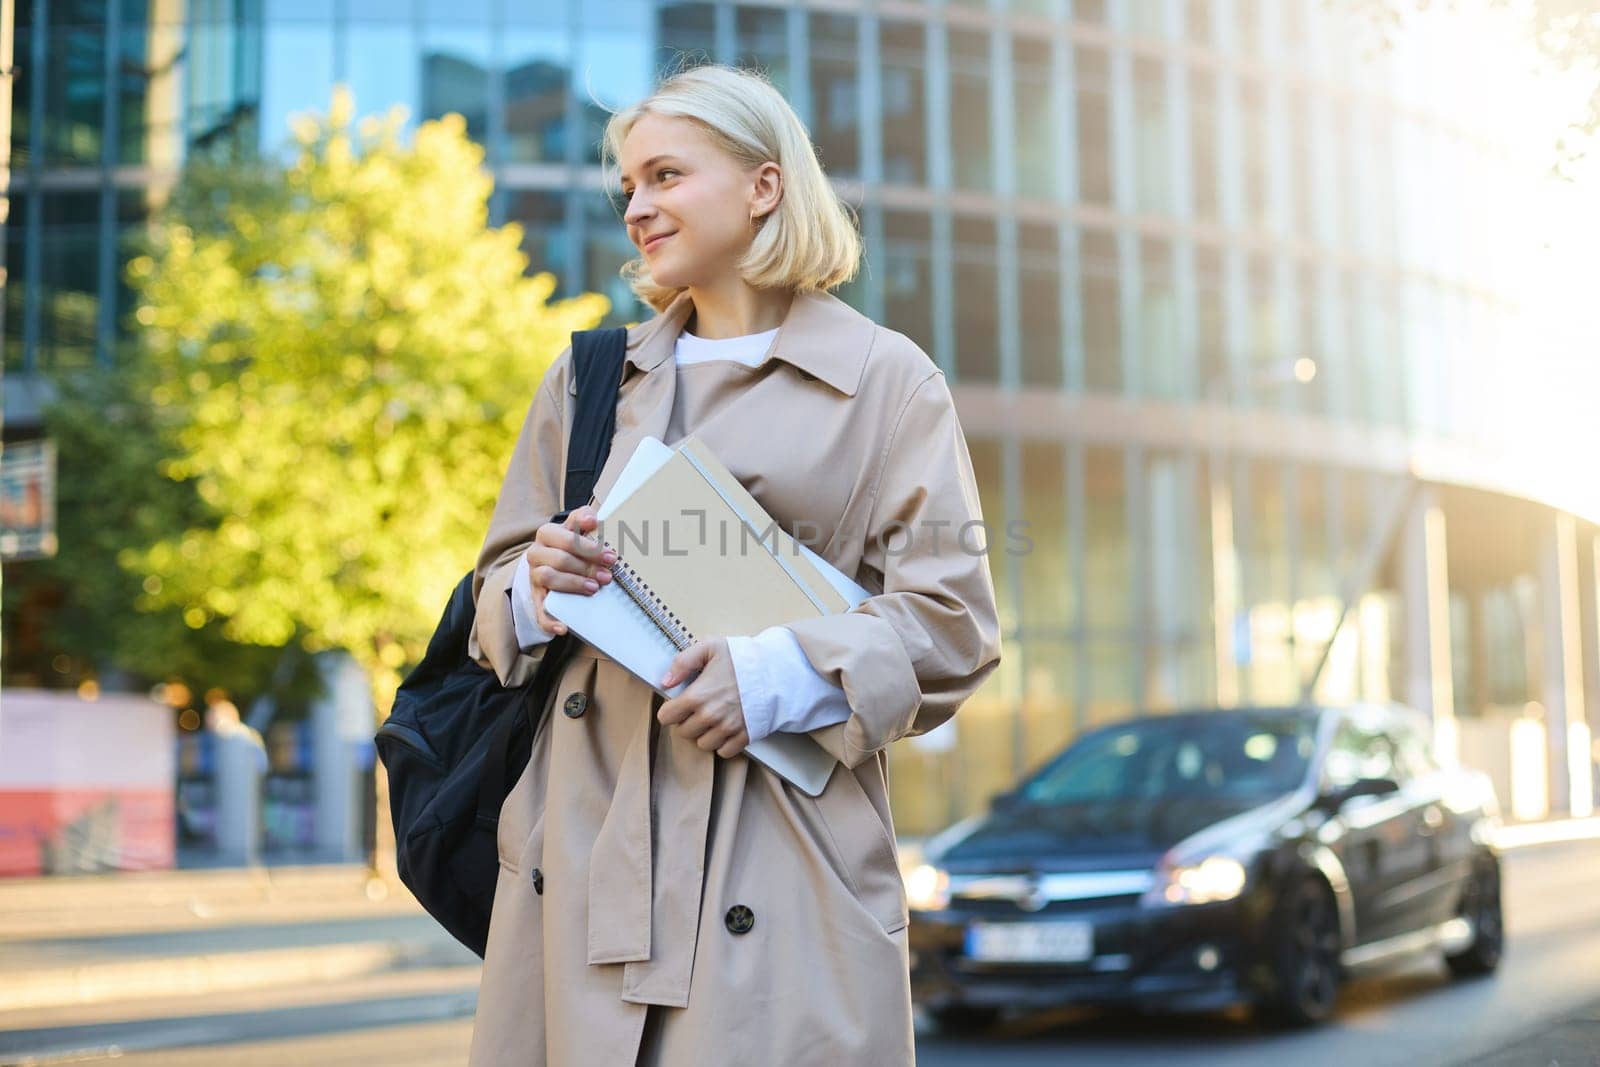 College lifestyle and student concept. Smiling blonde woman on street, sunny day, skyscraper behind her, girl holding documents, notebooks and backpack.